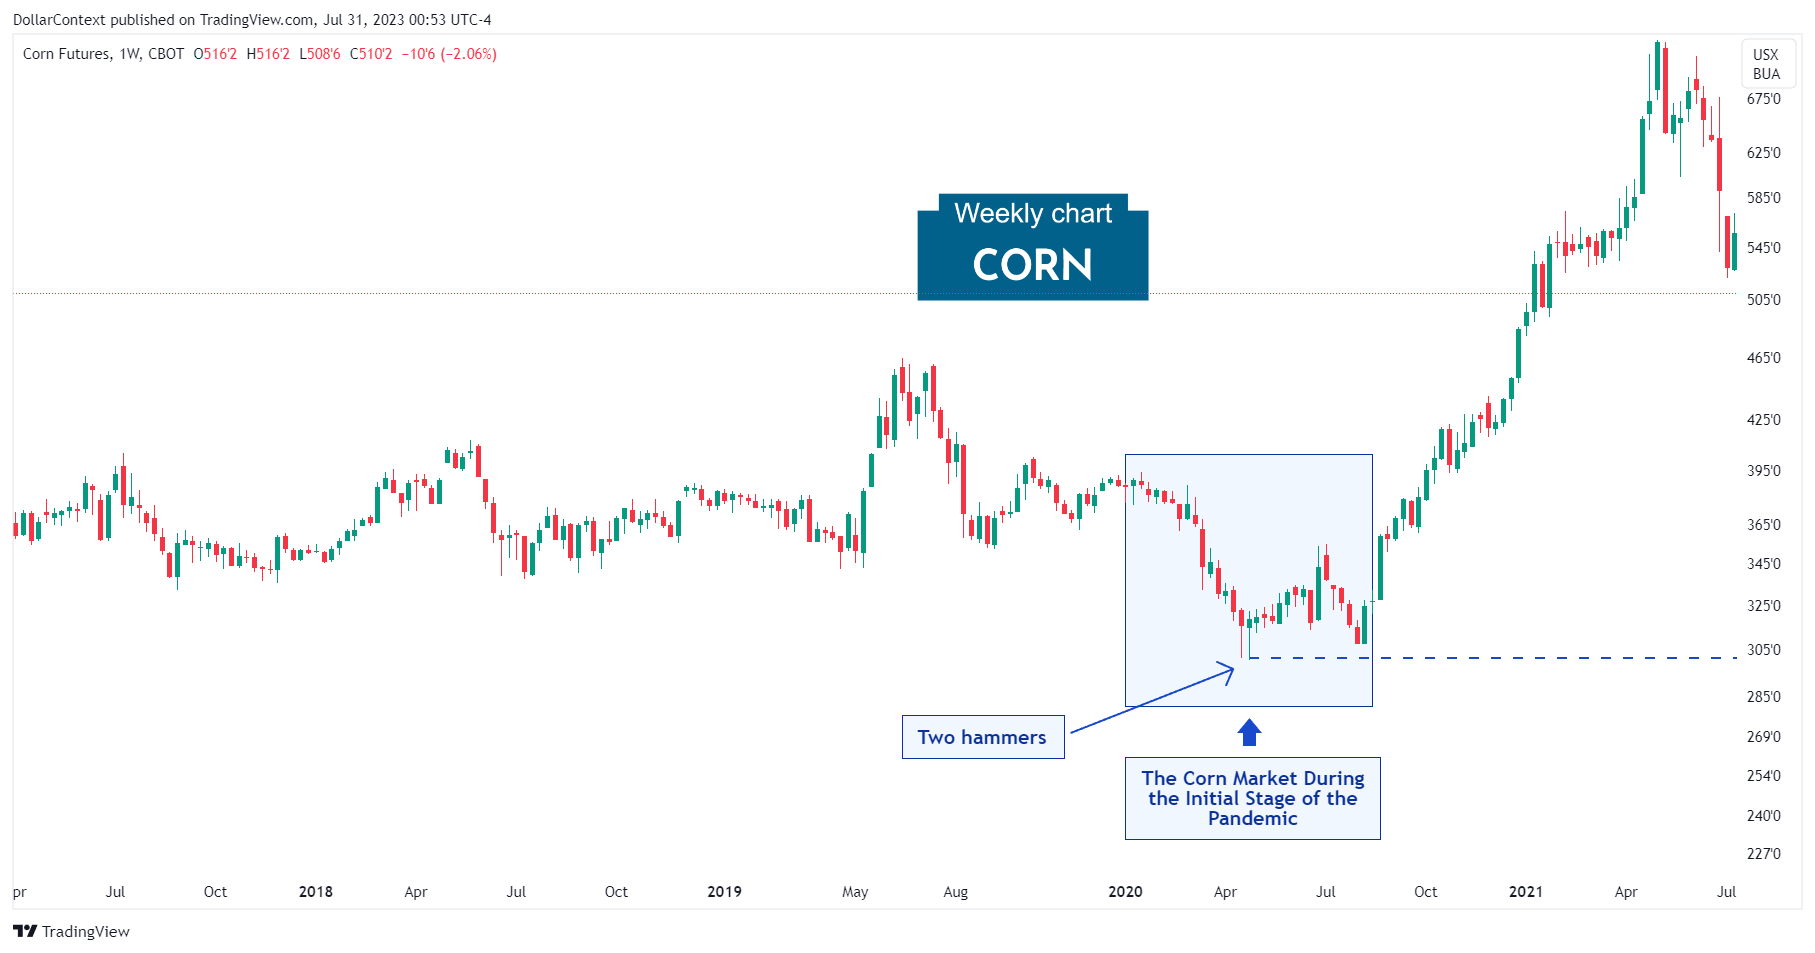 Corn Prices During the Pandemic